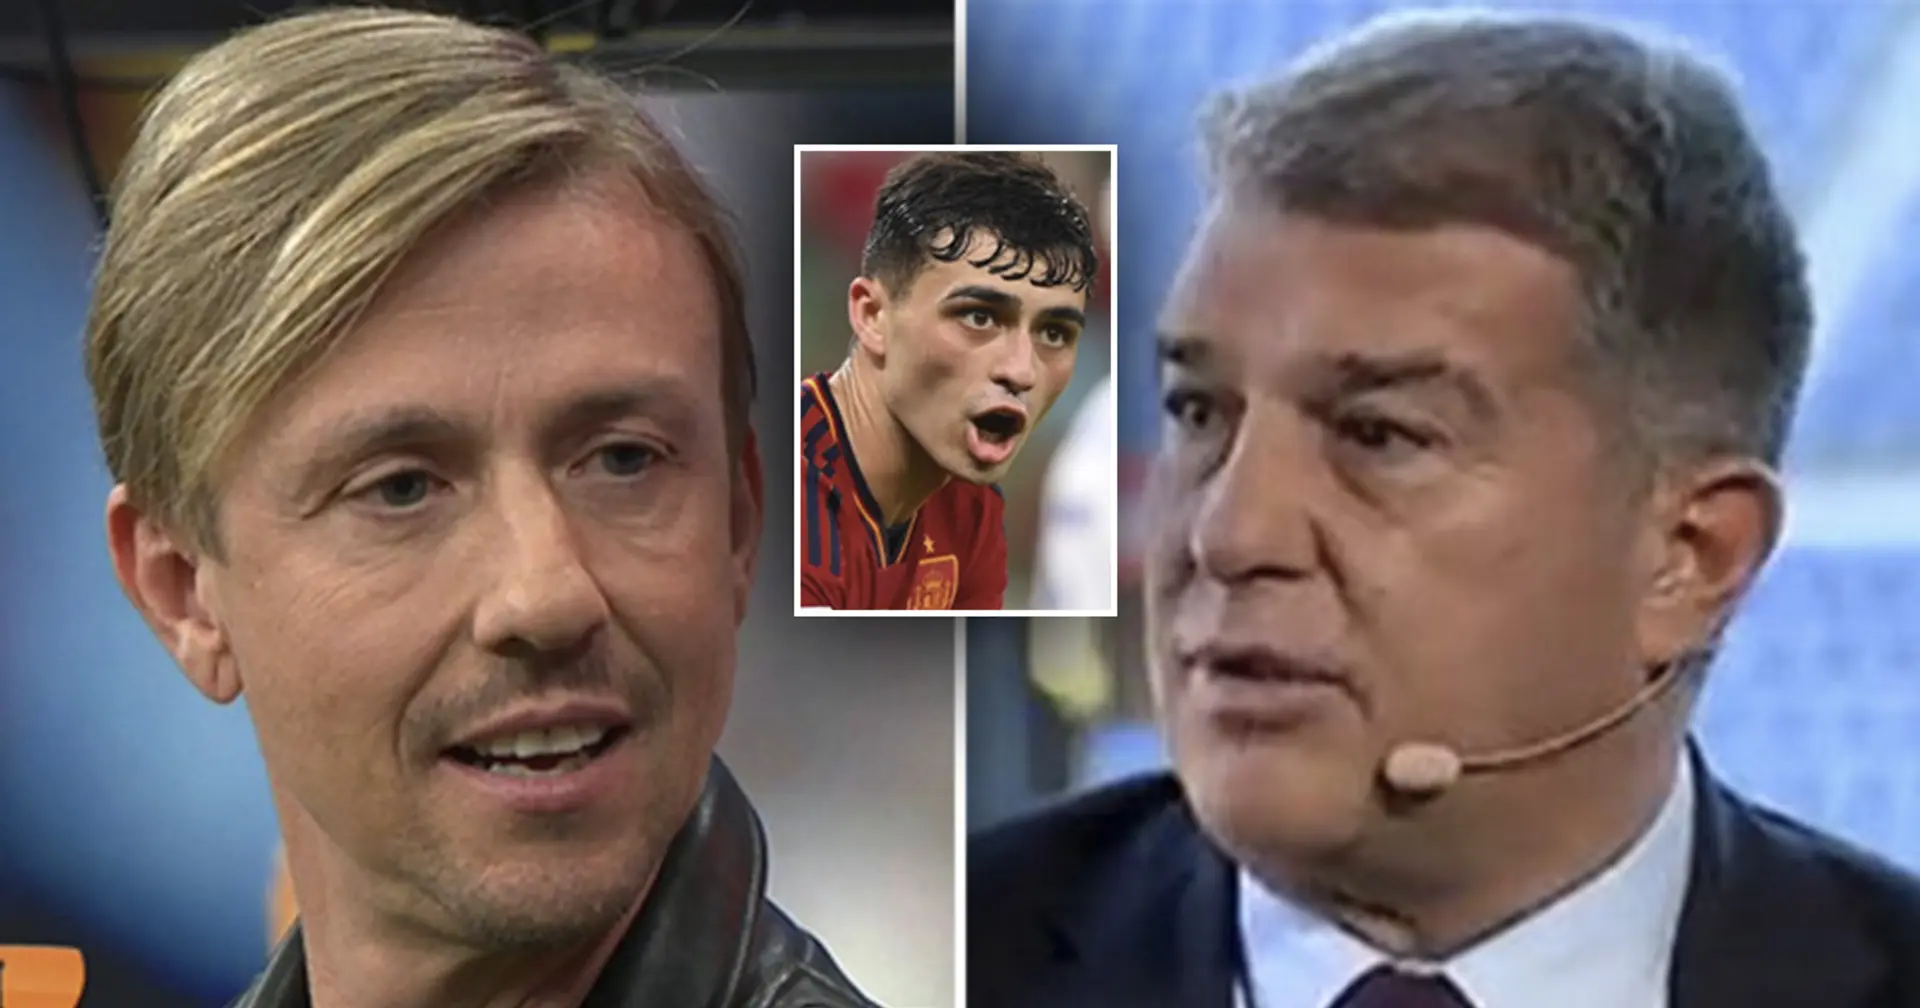 'Focus on La Liga, leave the national team alone': Real Madrid great Guti hits out at Laporta amid Spain praise